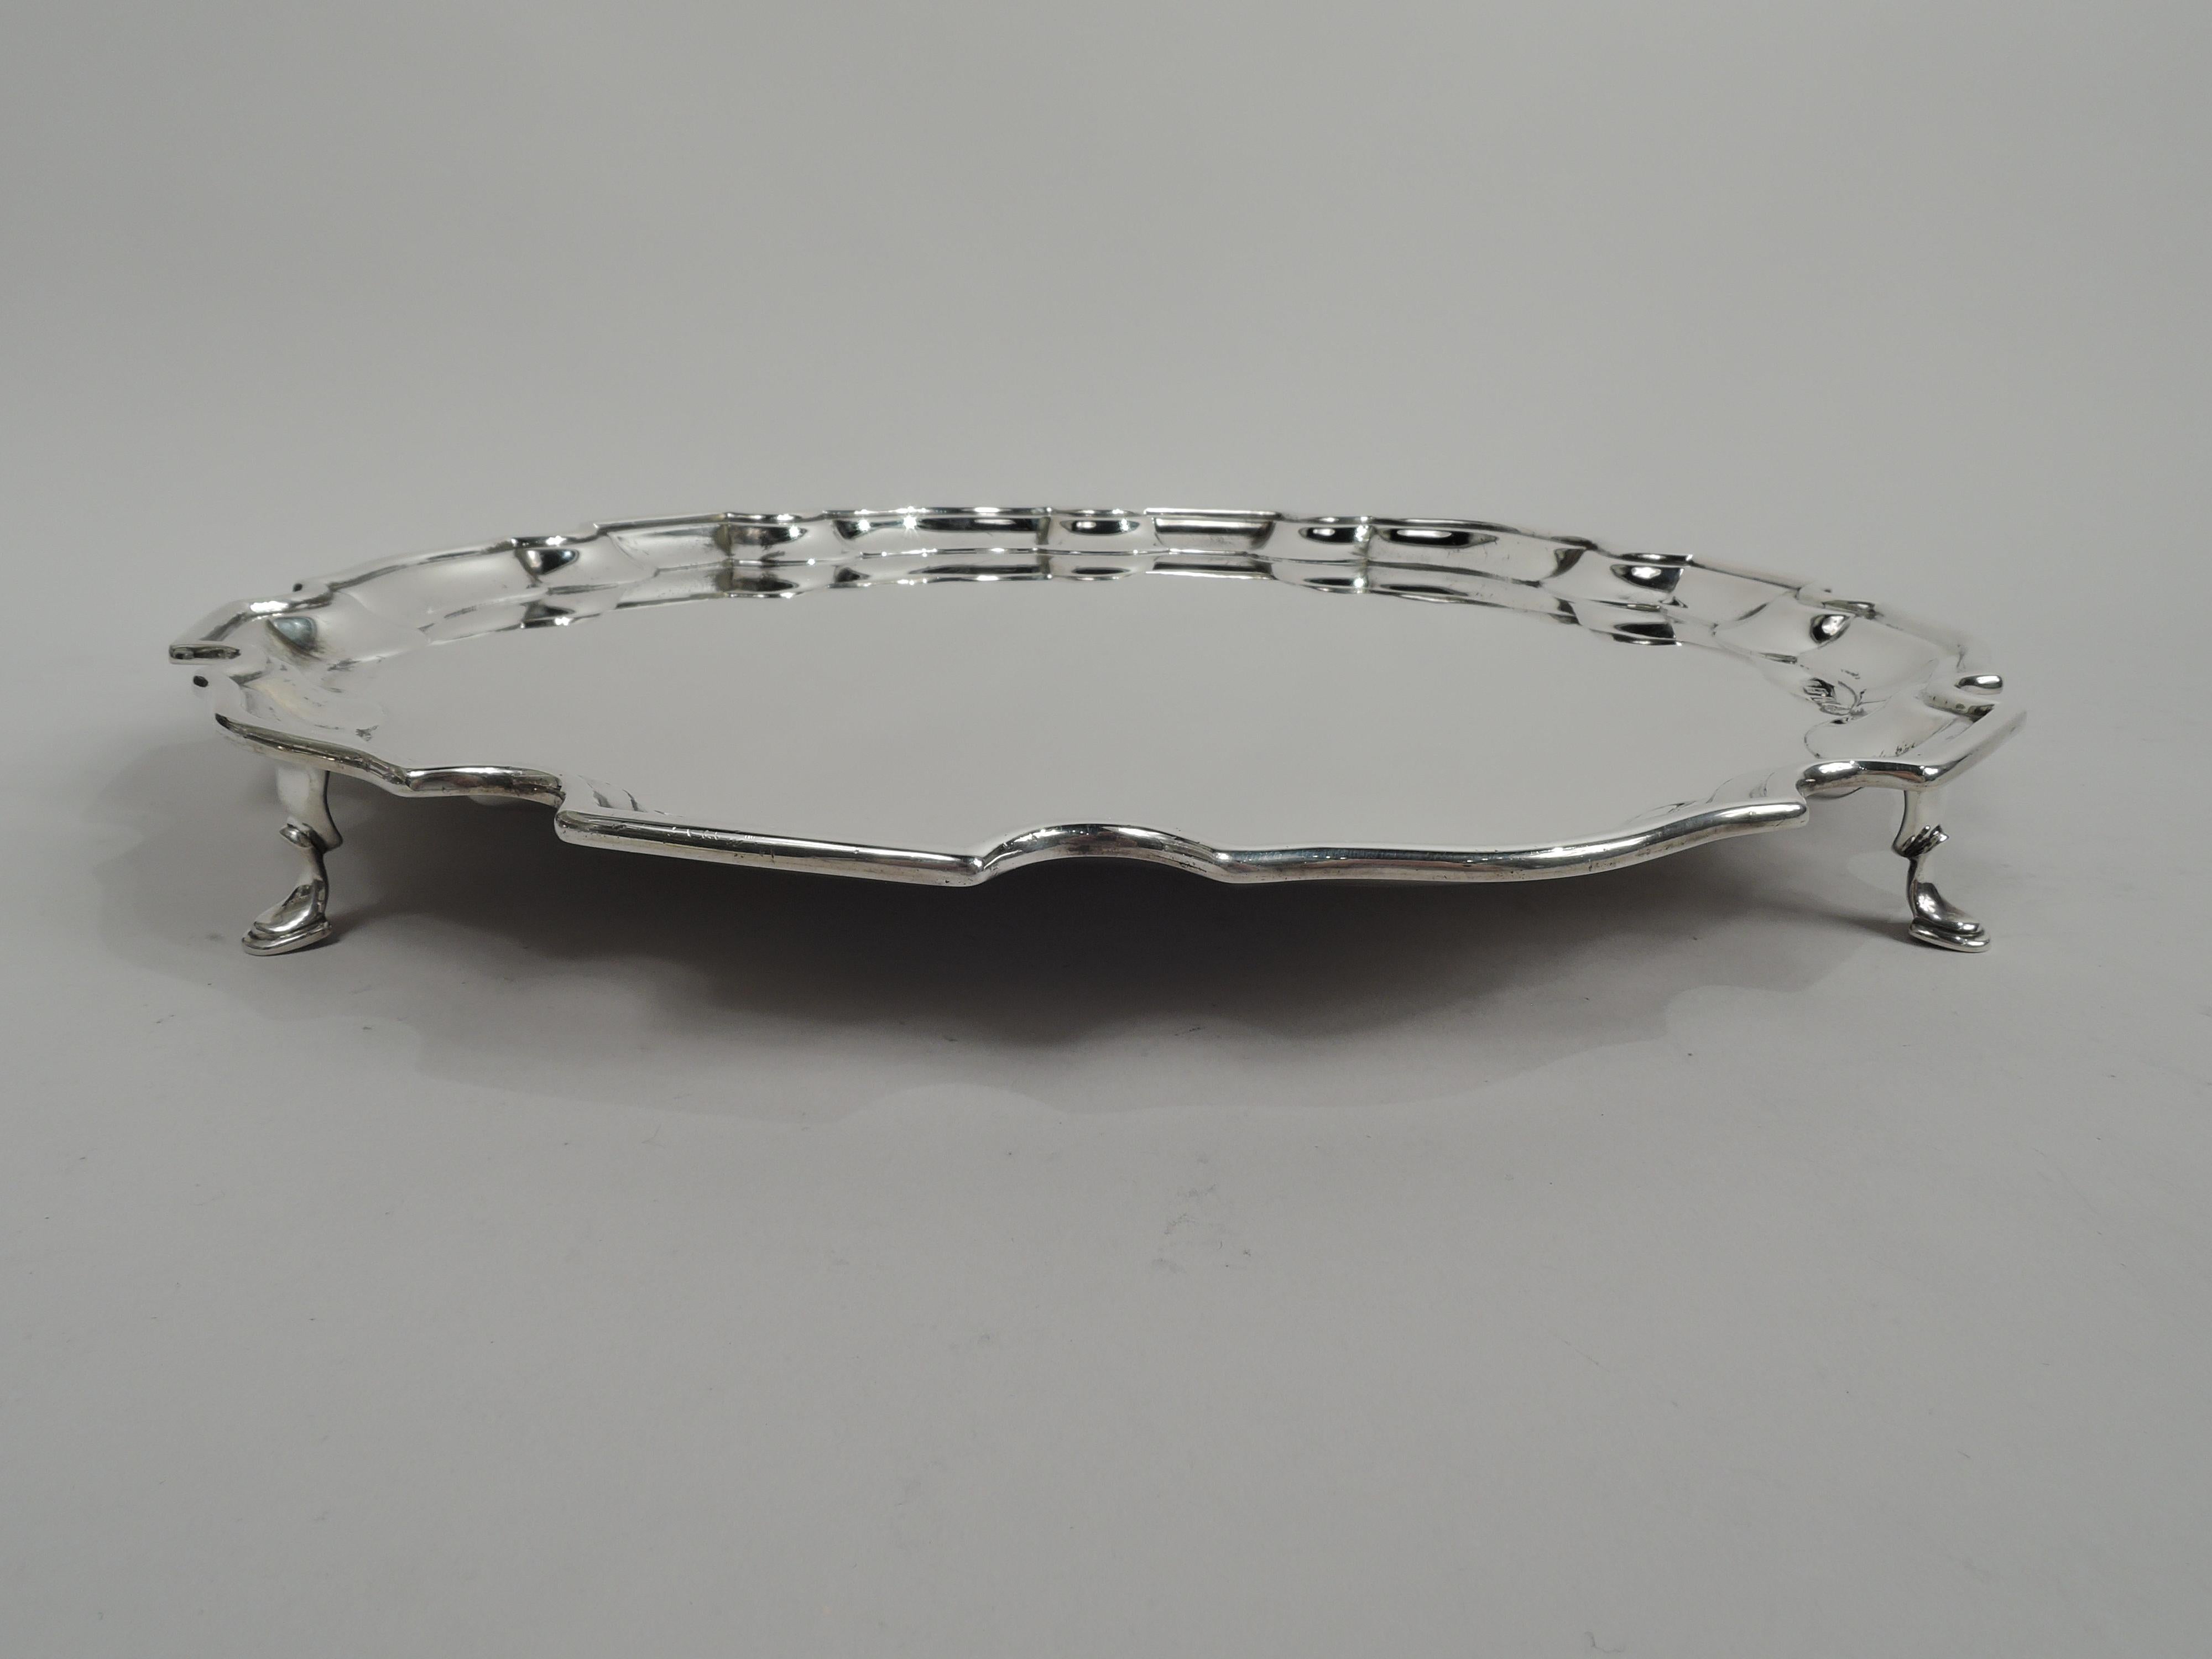 English Georgian sterling silver salver, 1936. Round with molded curvilinear piecrust rim. Rests on four hoof supports. Traditional with nice heft. Fully marked including Selfridge & Co., Ltd retailer’s stamp and Birmingham assay stamp. Weight: 37.5